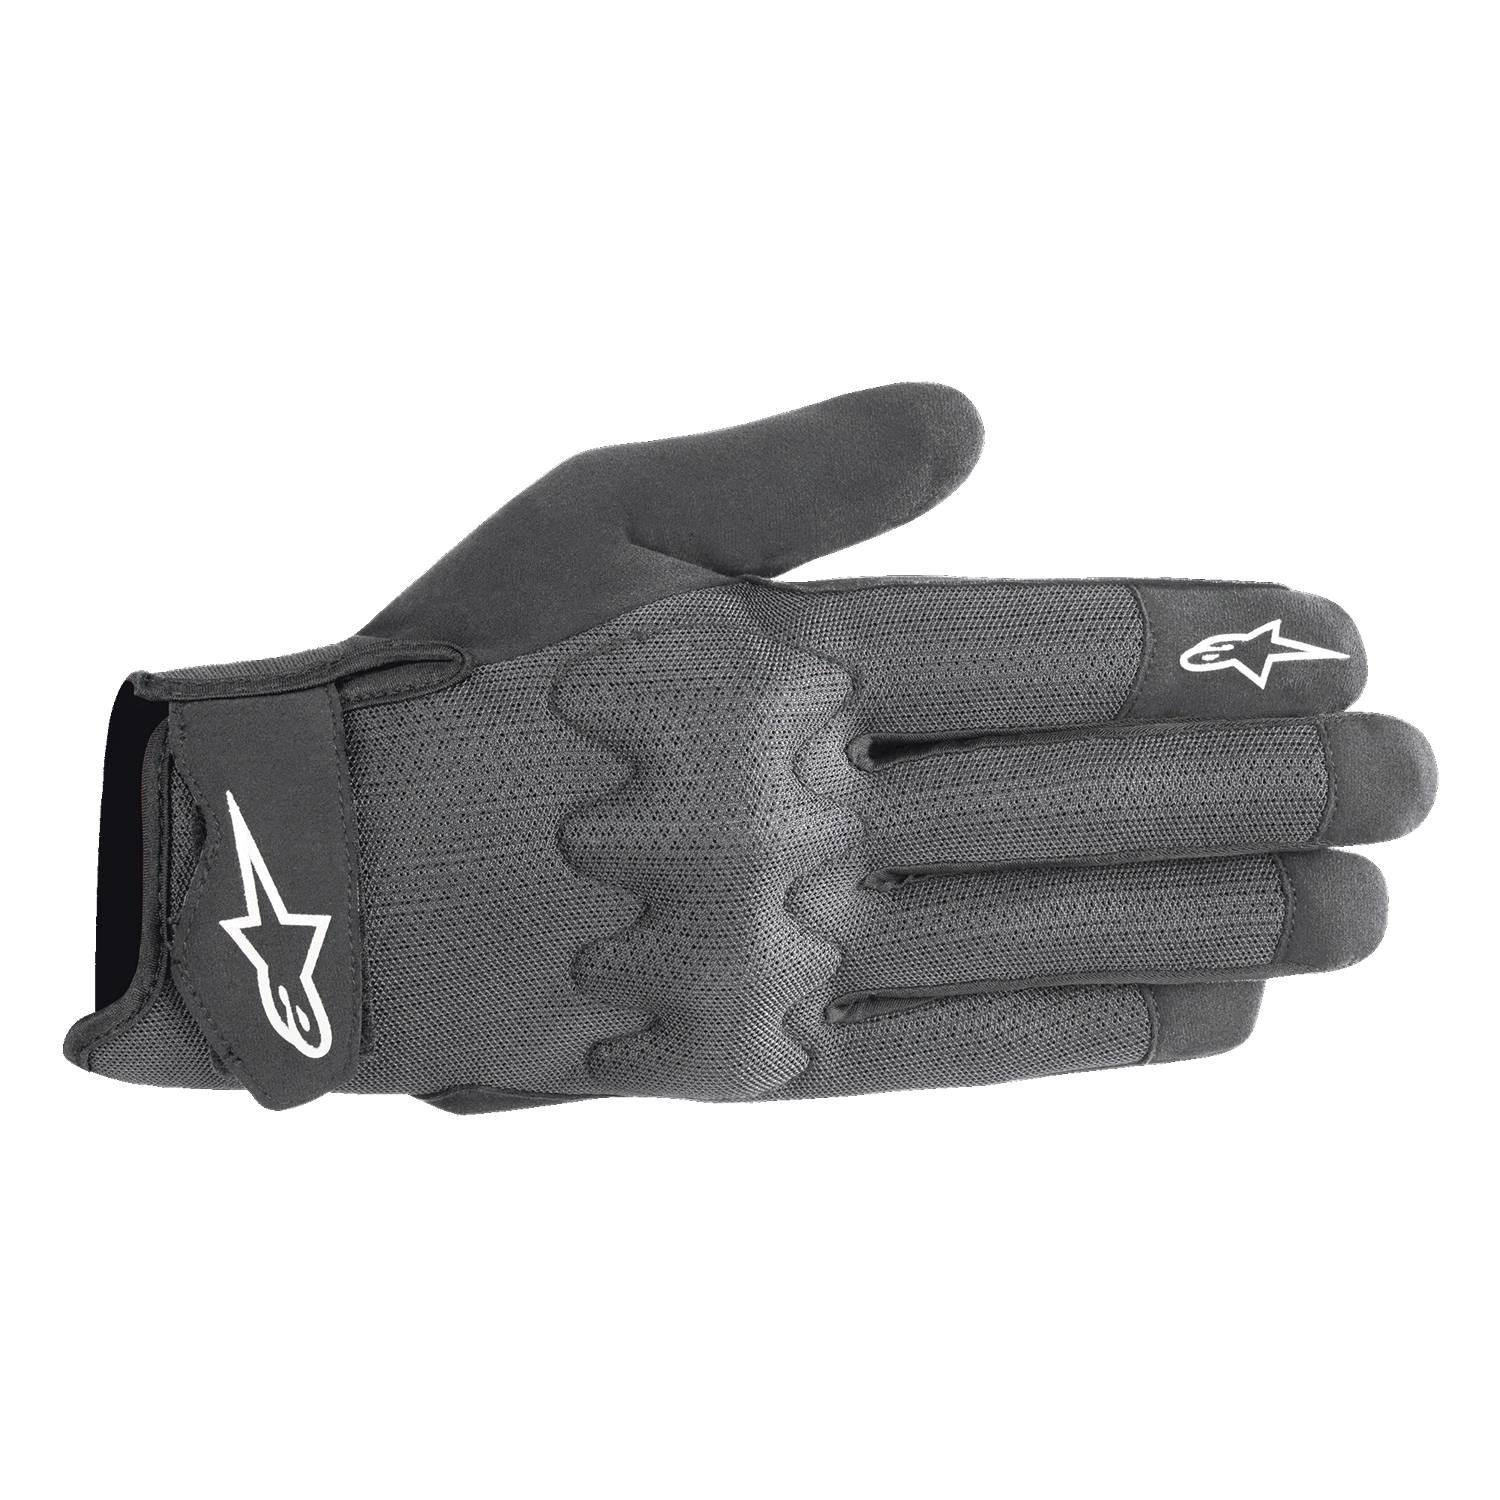 Image of Alpinestars Stated Air Gloves Black Silver Size XL EN